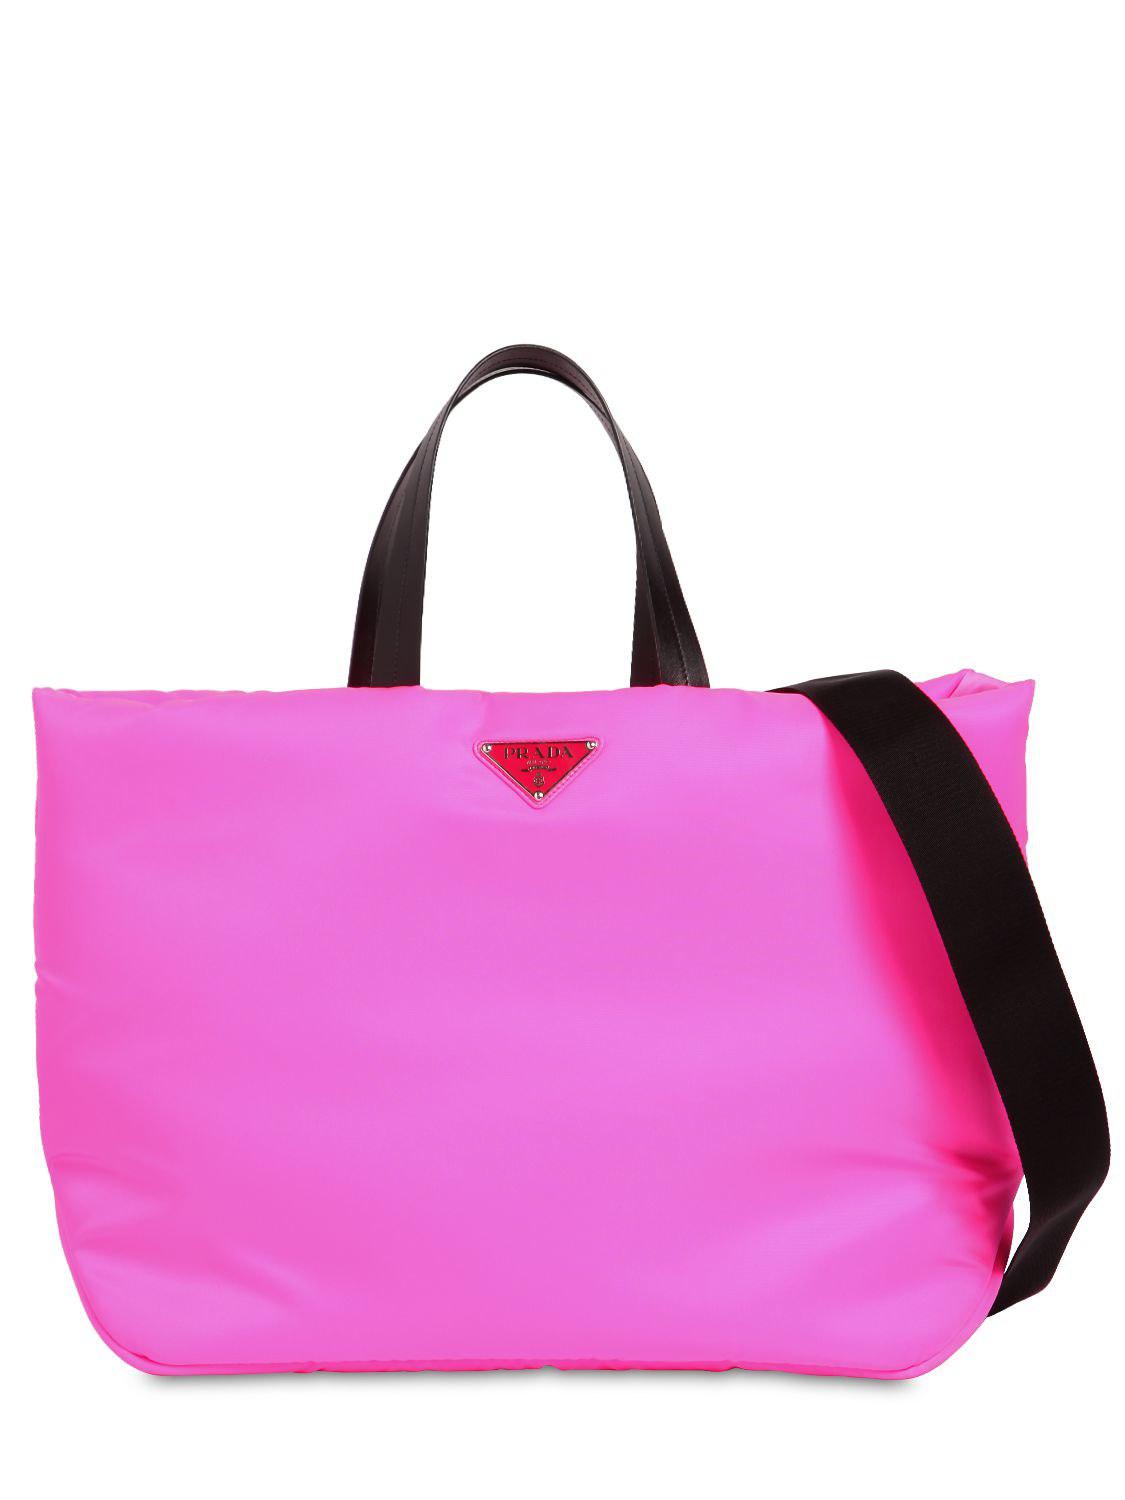 Prada Synthetic Puffer Nylon Tote Bag in Pink | Lyst